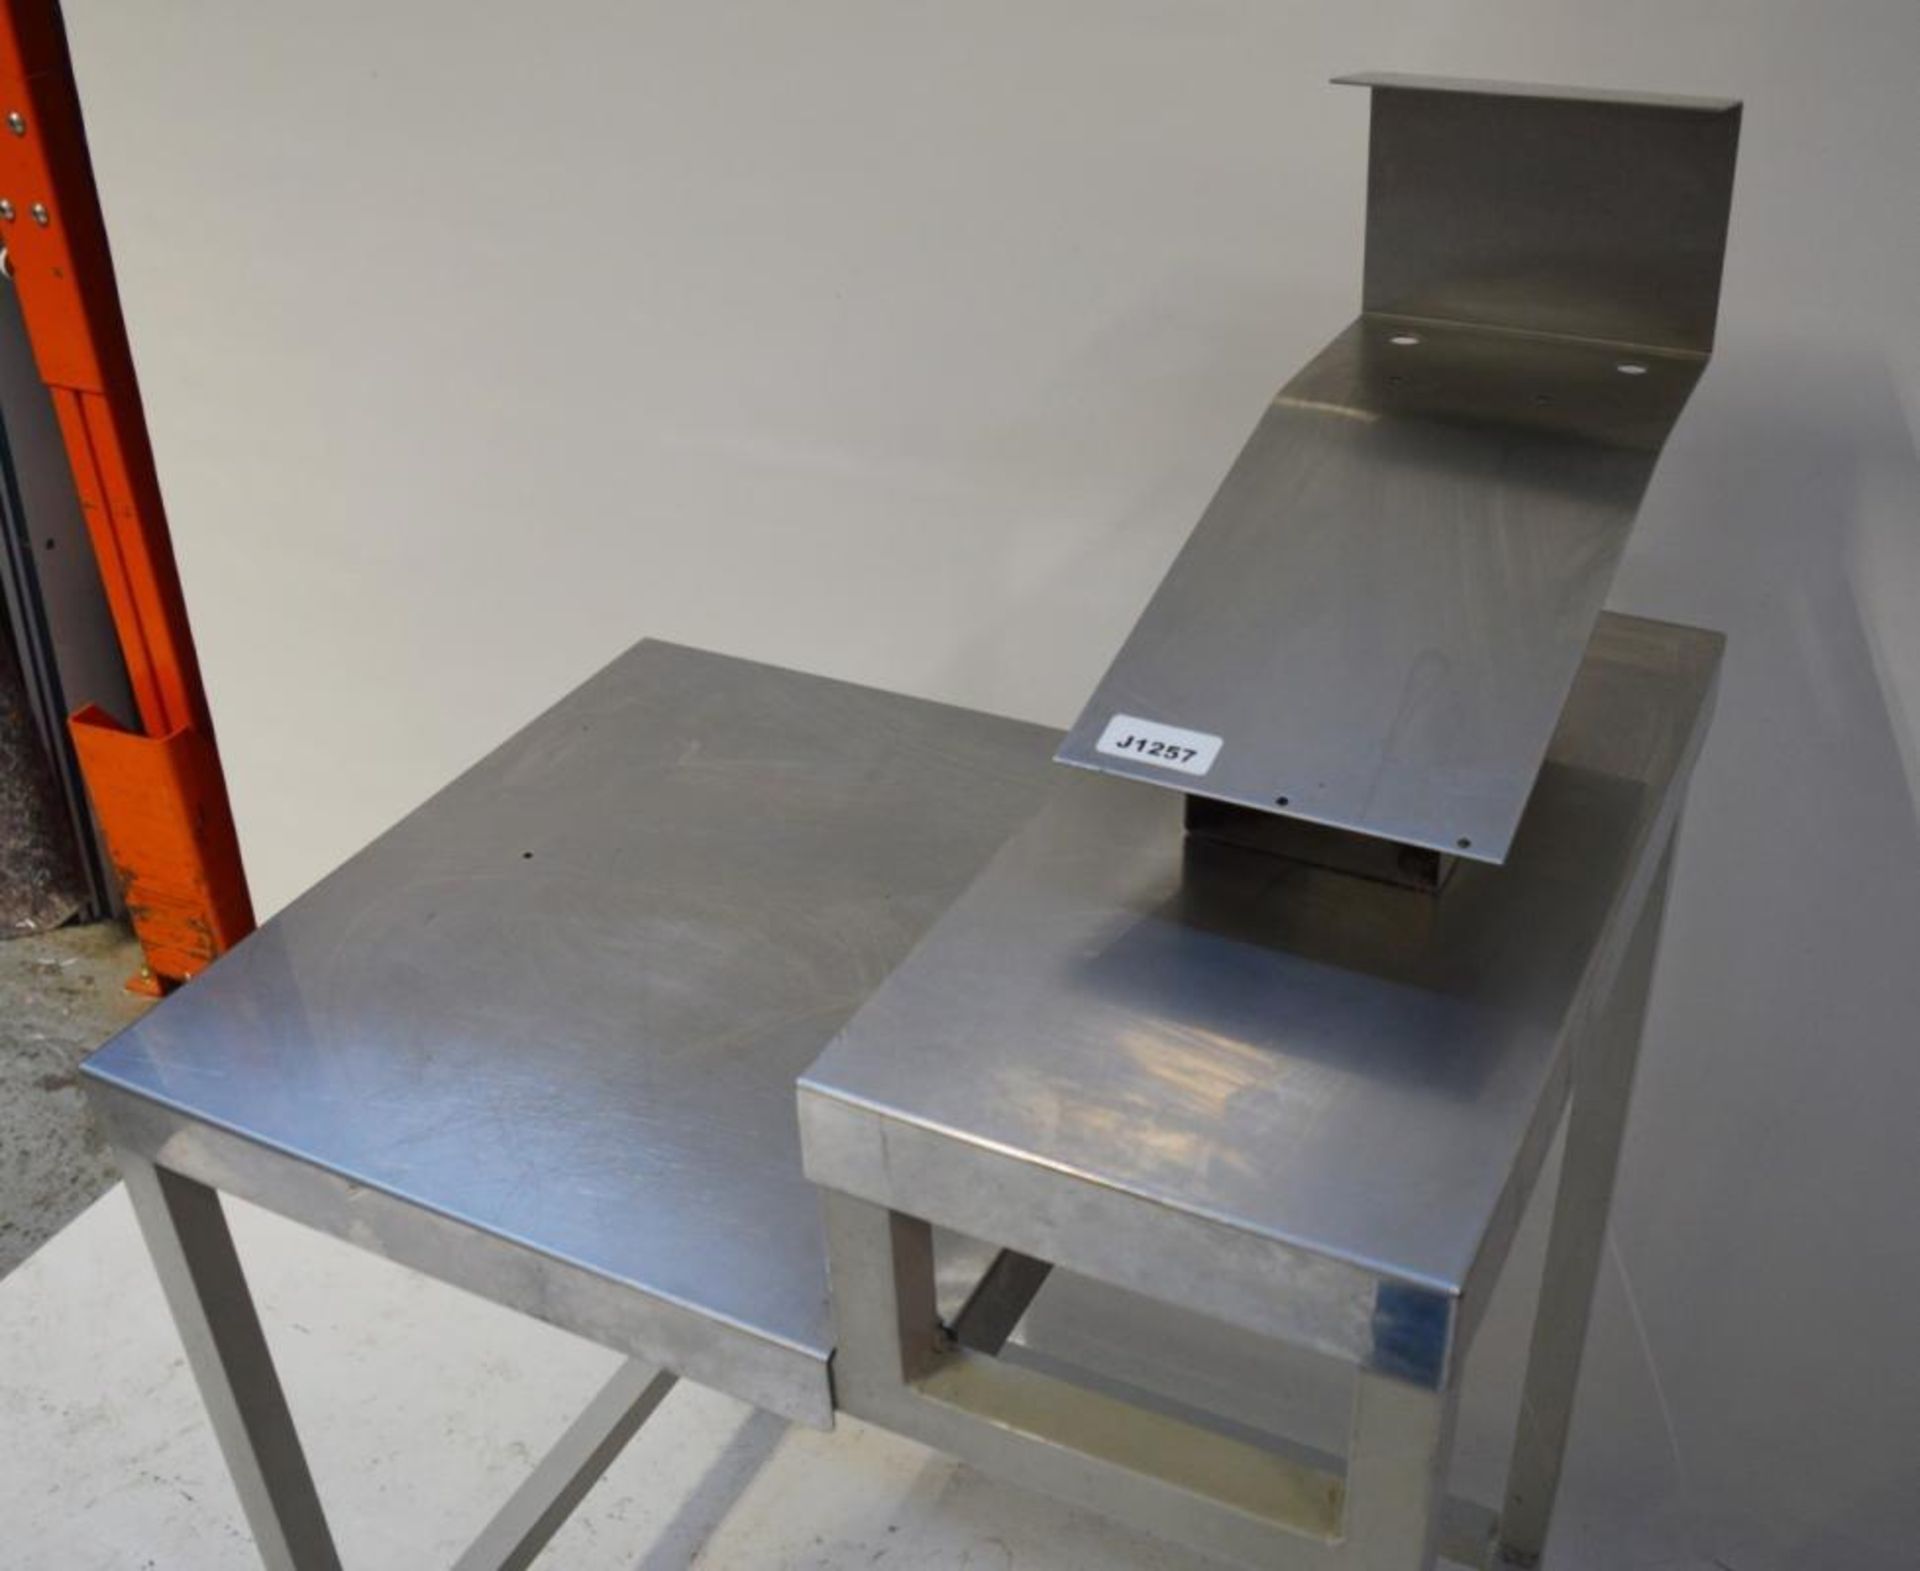 1 x Preperation Work Table With Stainless Steel Top - CL232 - Ref J1257 - H75/89.5 x W71 x D52 cms - - Image 3 of 3